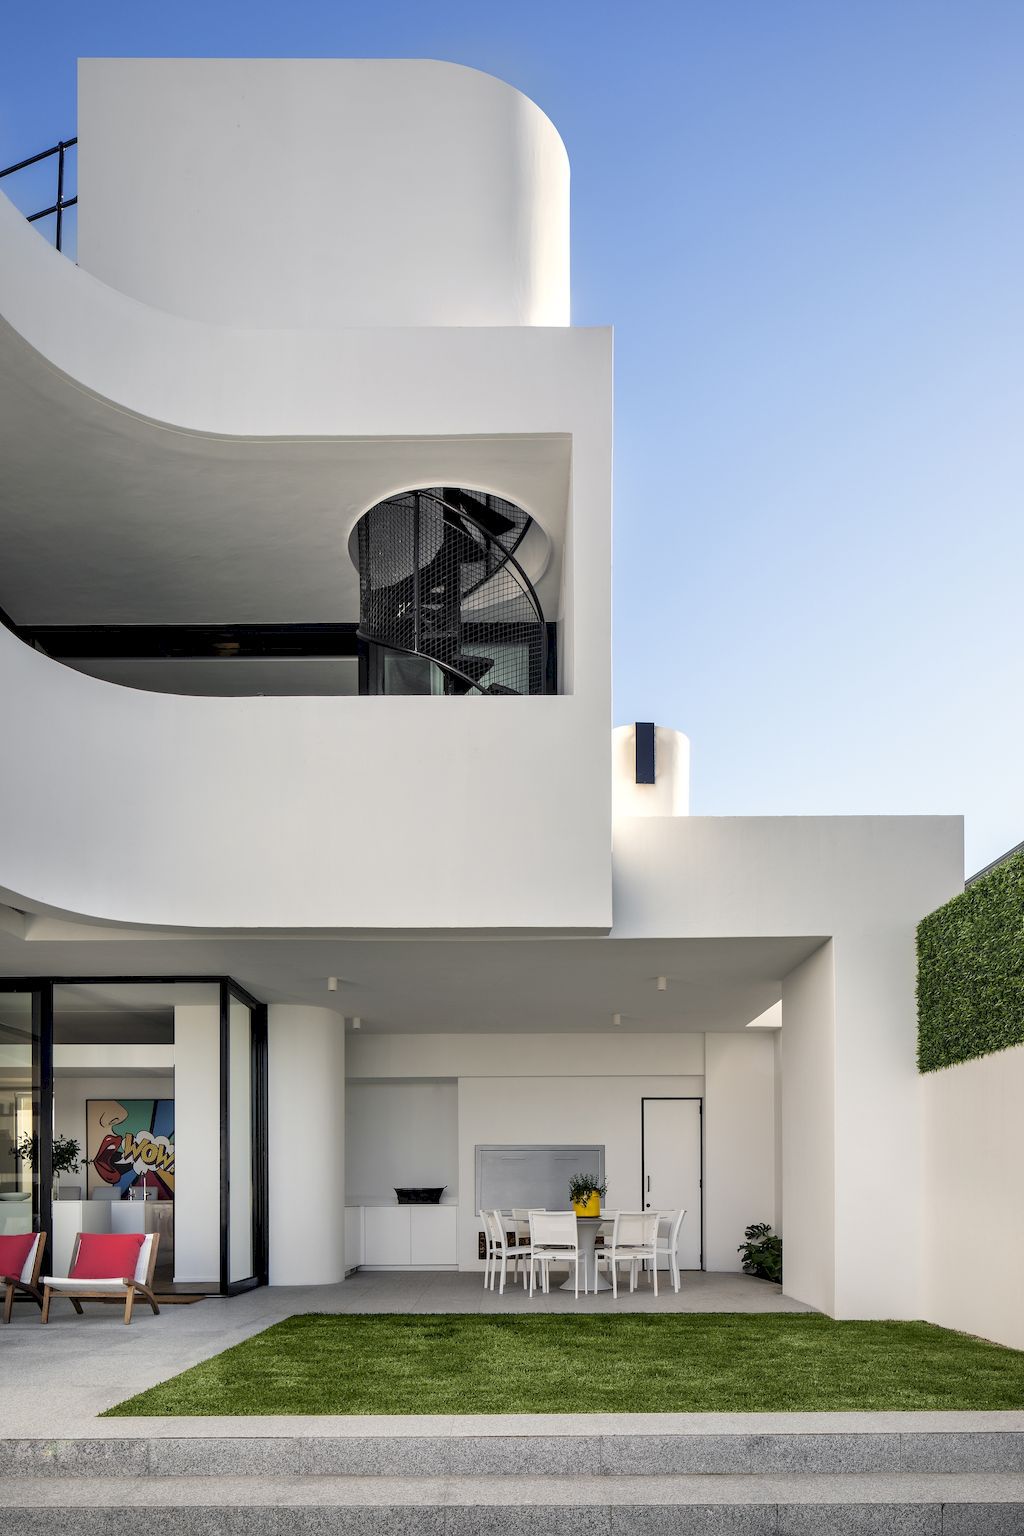 Stunning Project 216 Ocean View Drive House by Robert Silke & Partners